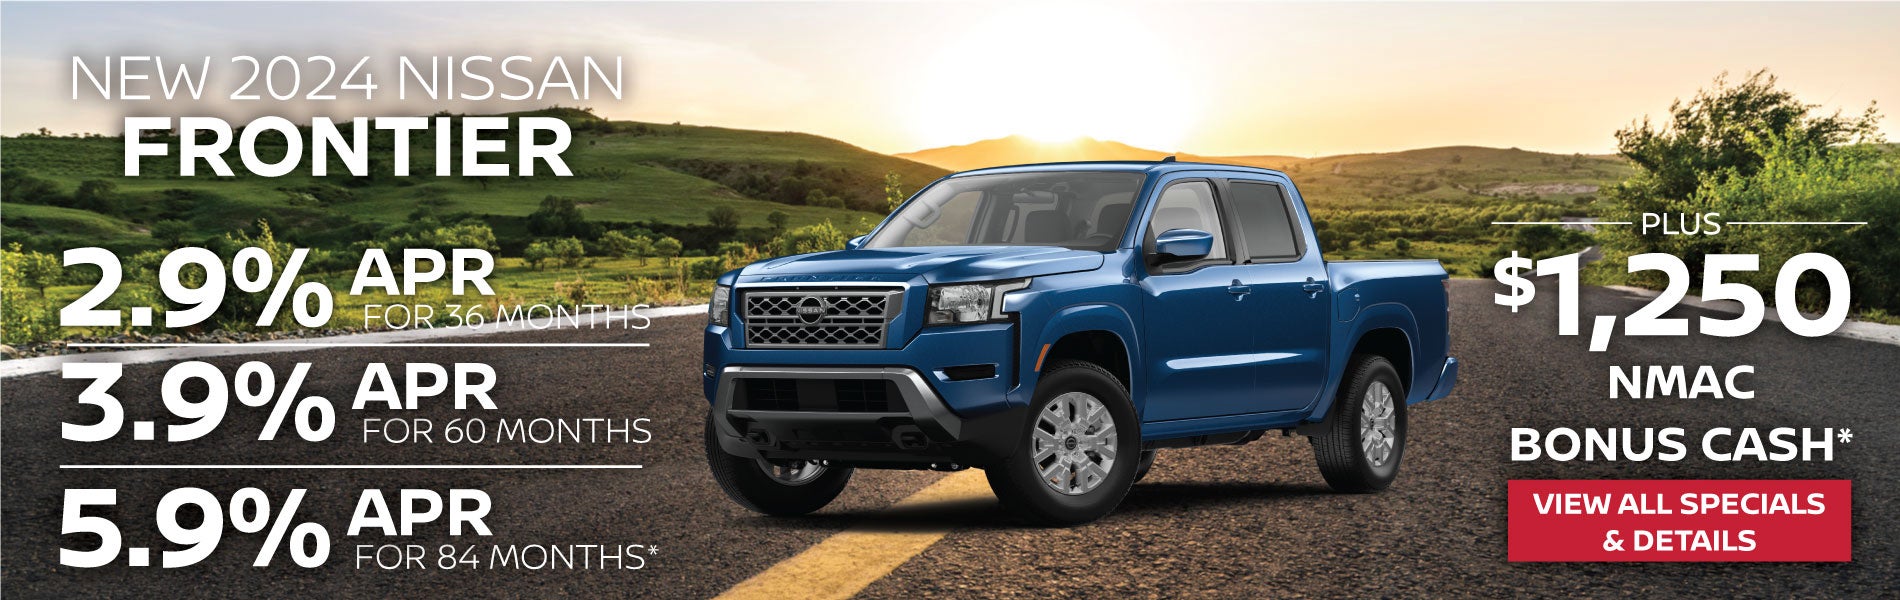 New 2024 Nissan Frontier 5.9% APR for 84 months